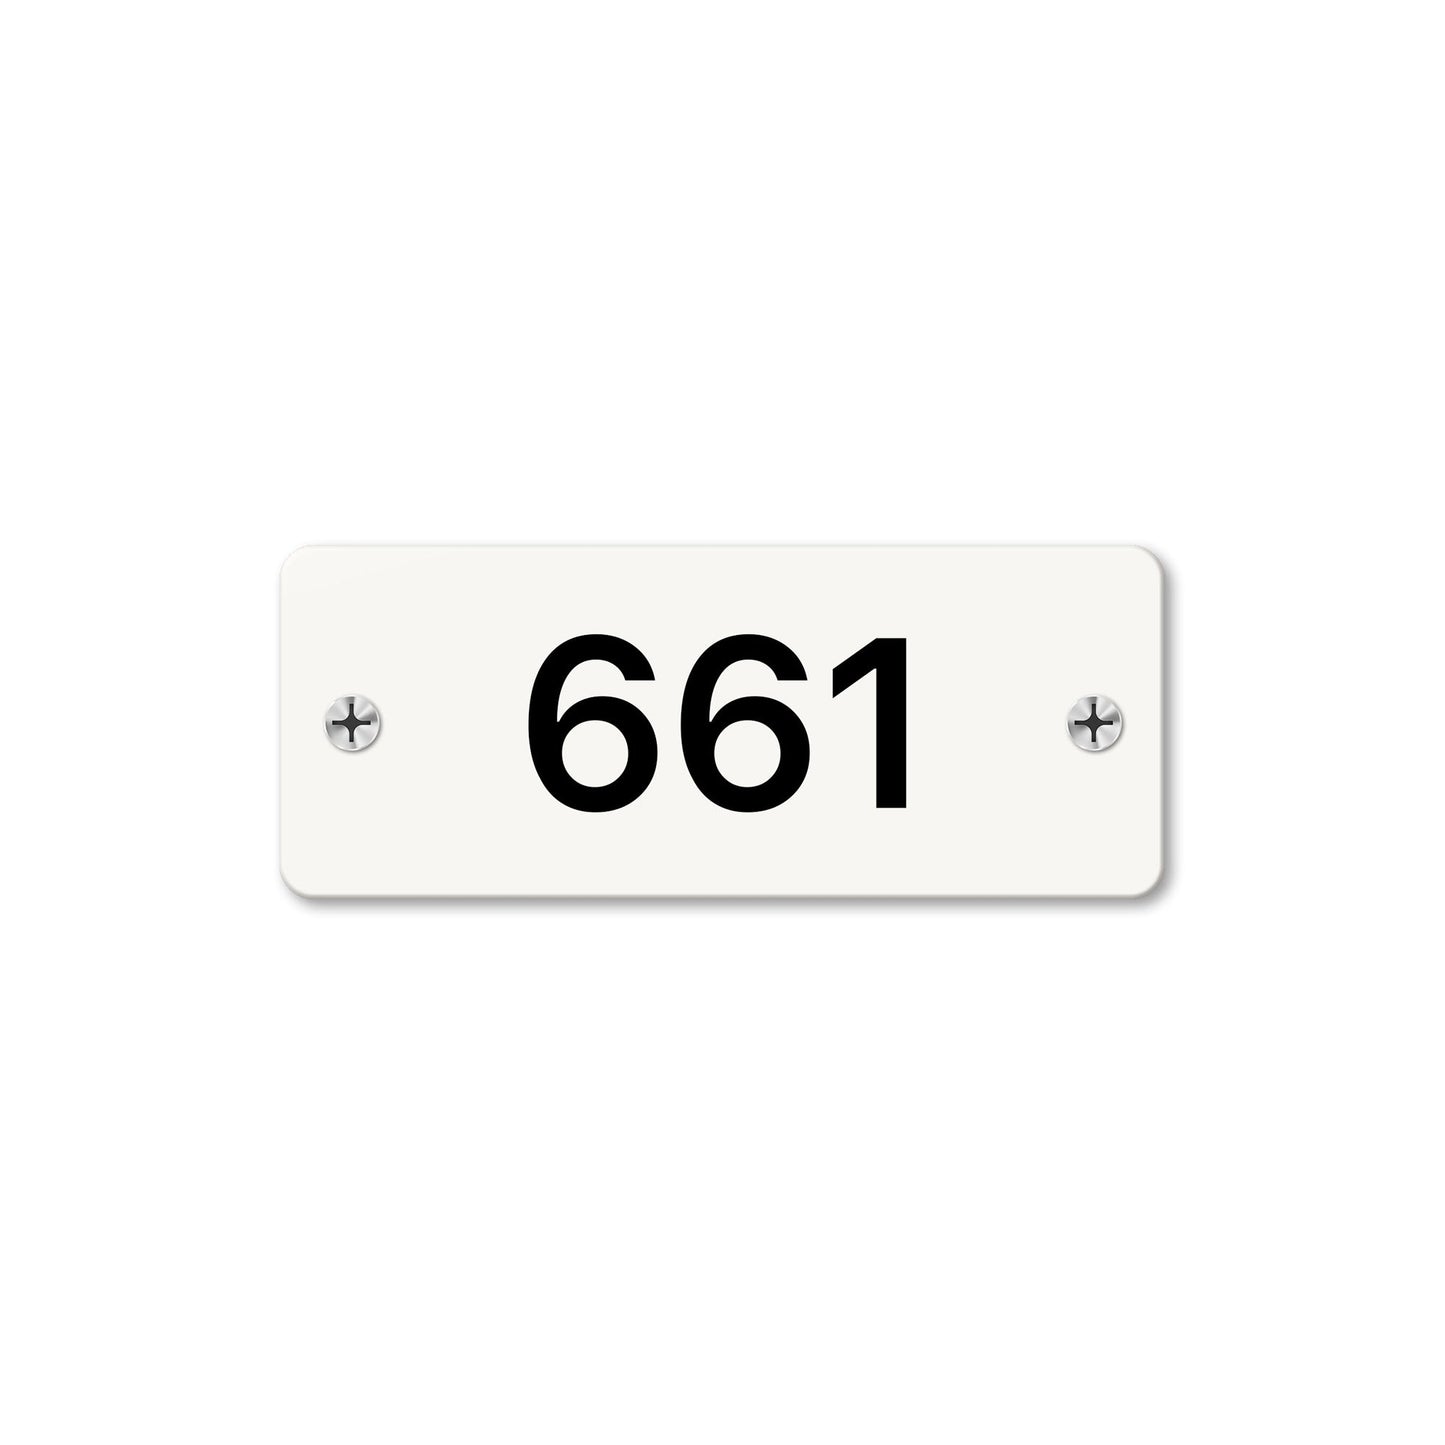 Numeral 661